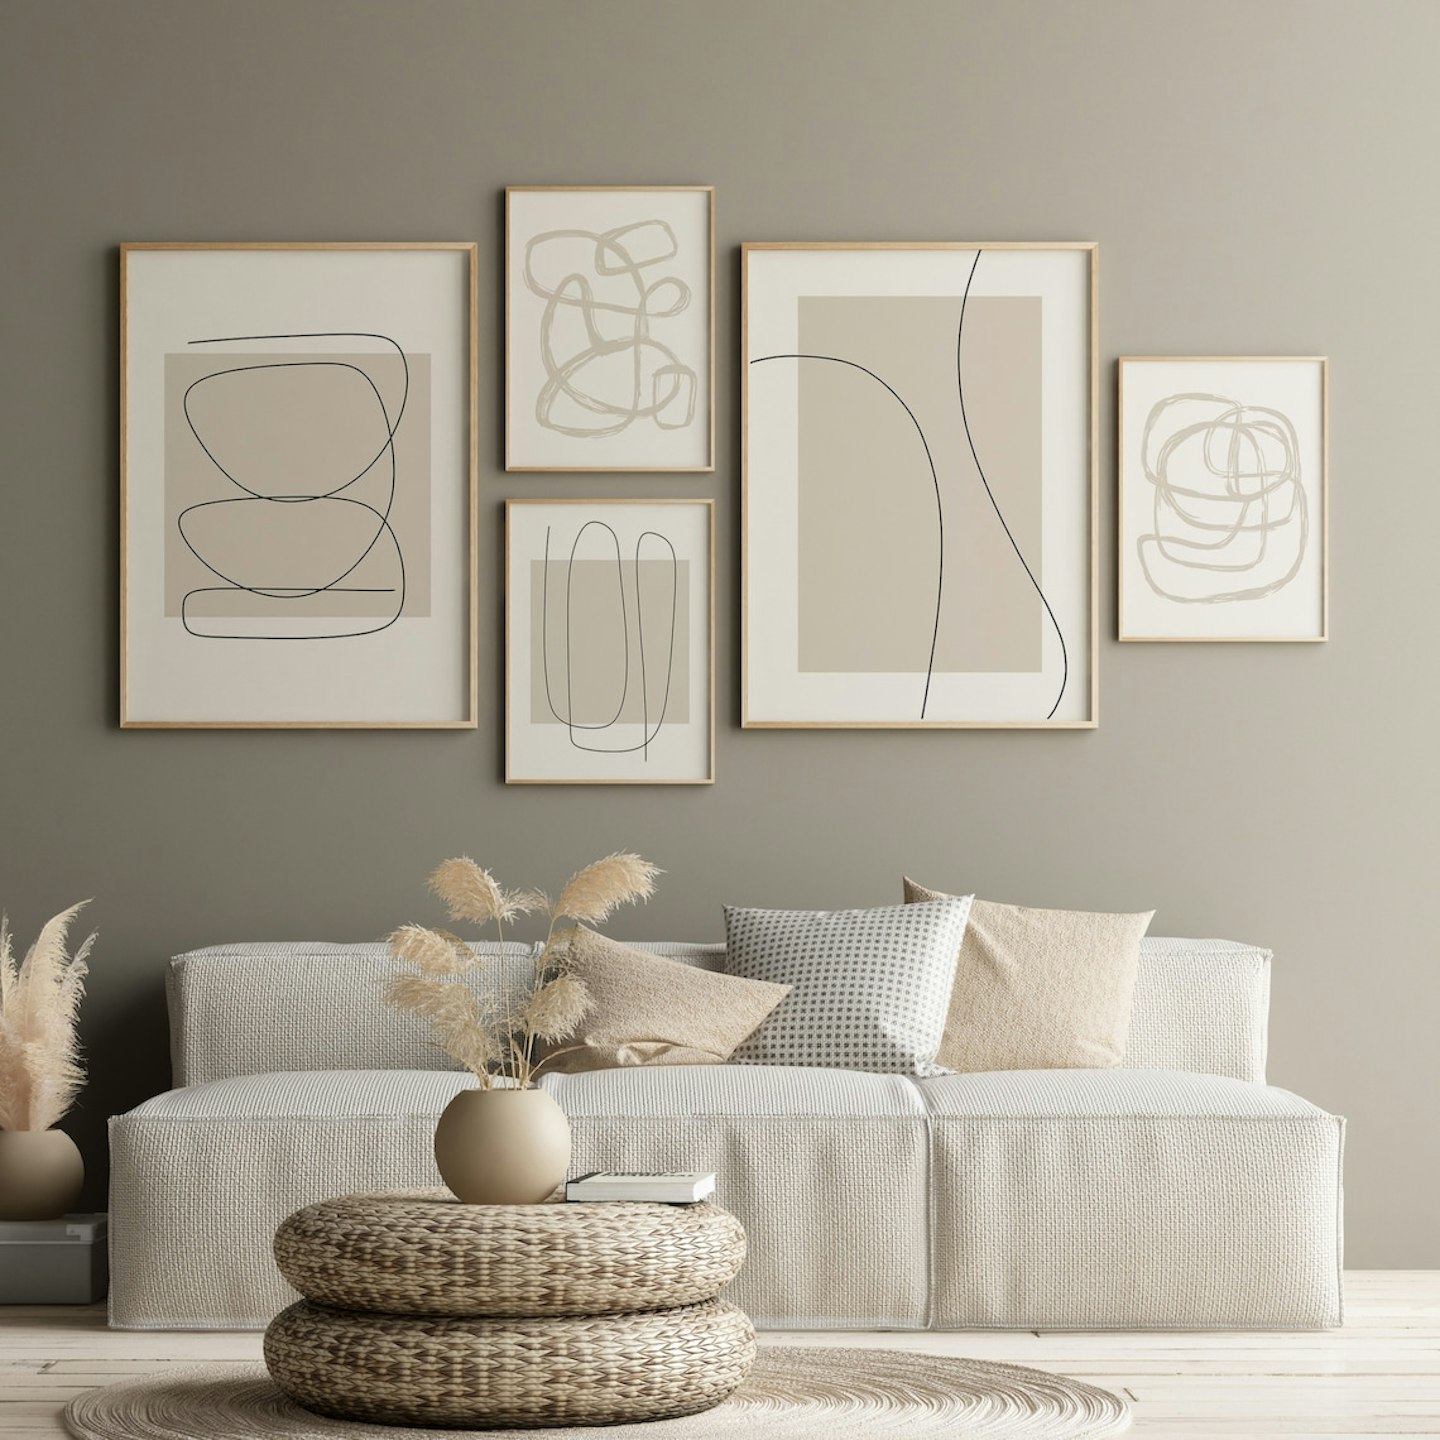 Etsy, Gallery Wall Prints Neutral Set of 5, From £25